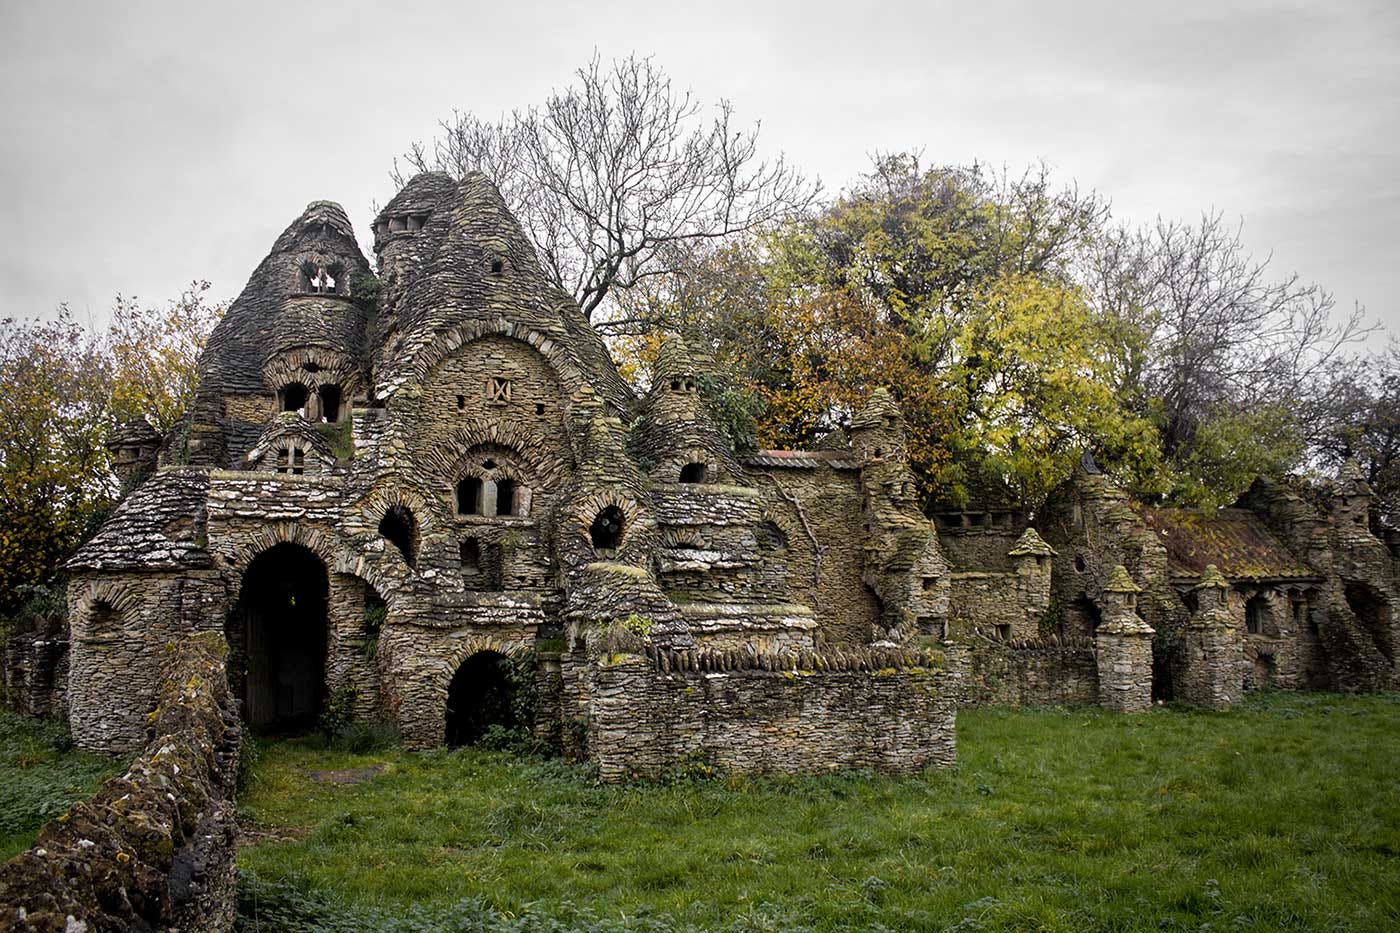 A bizarre little stone house that looks like something from a fairytale.